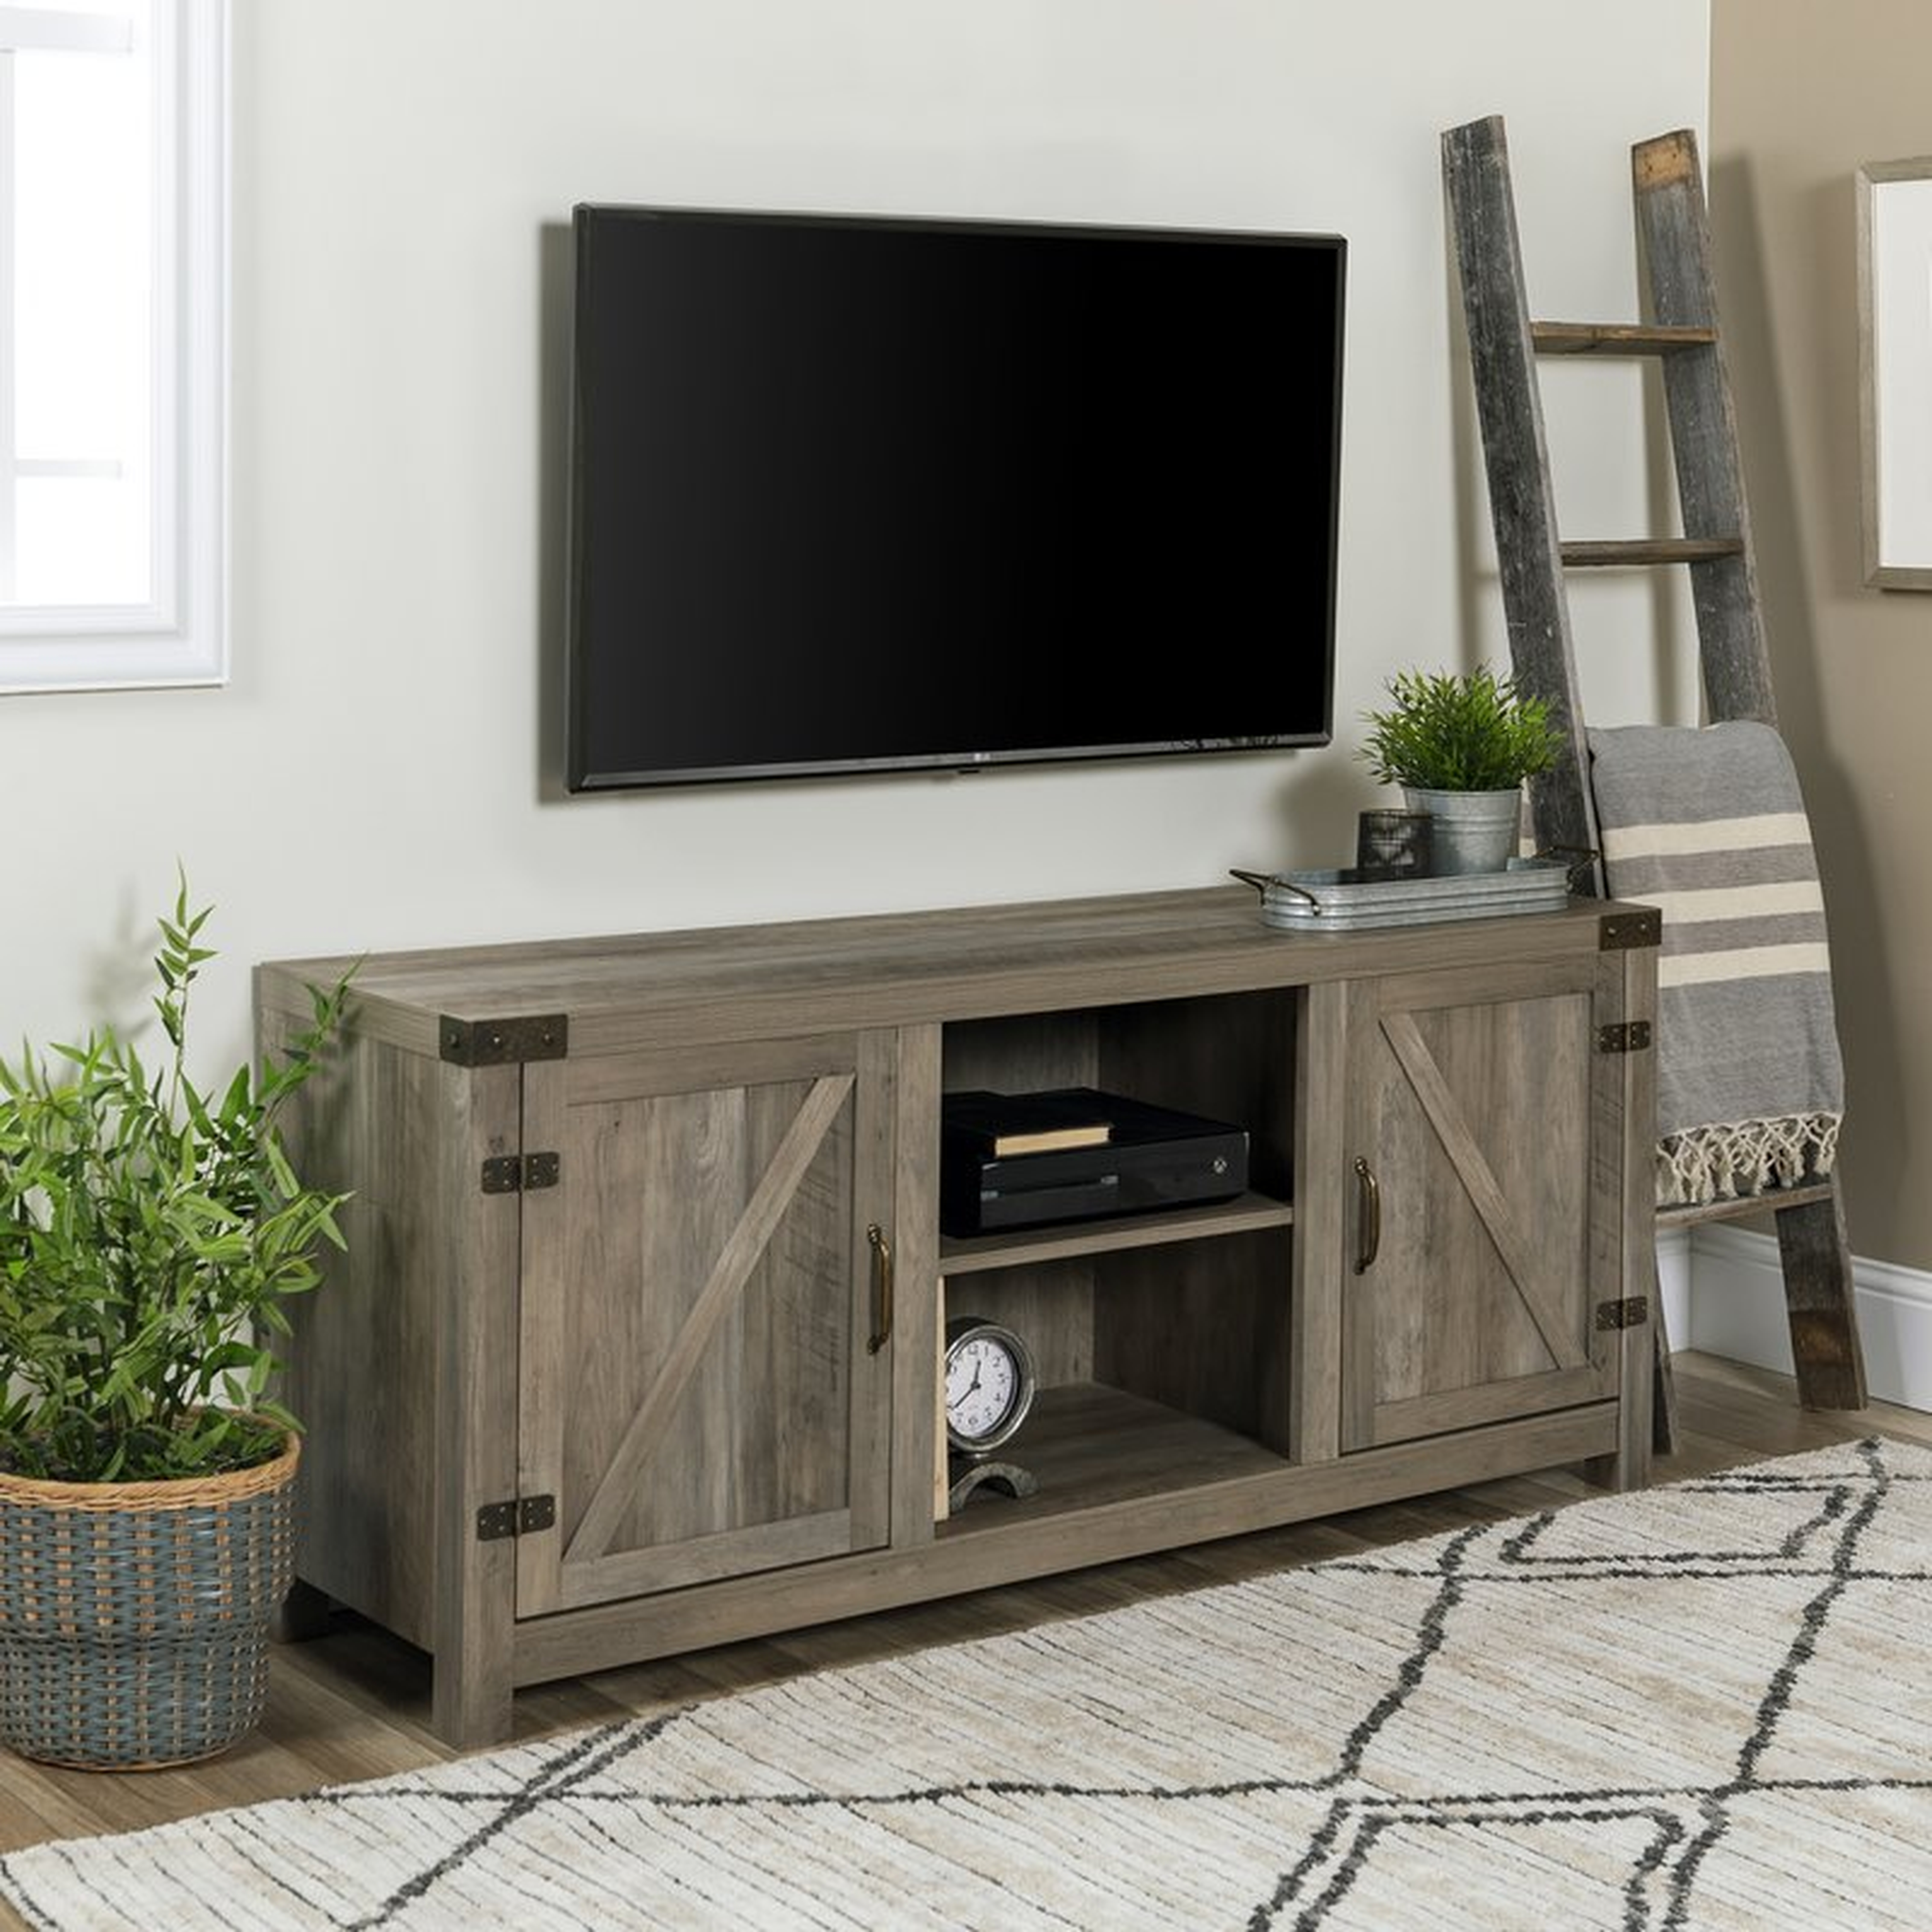 Adalberto TV Stand for TVs up to 65" with optional Fireplace, Gray Wash - Birch Lane